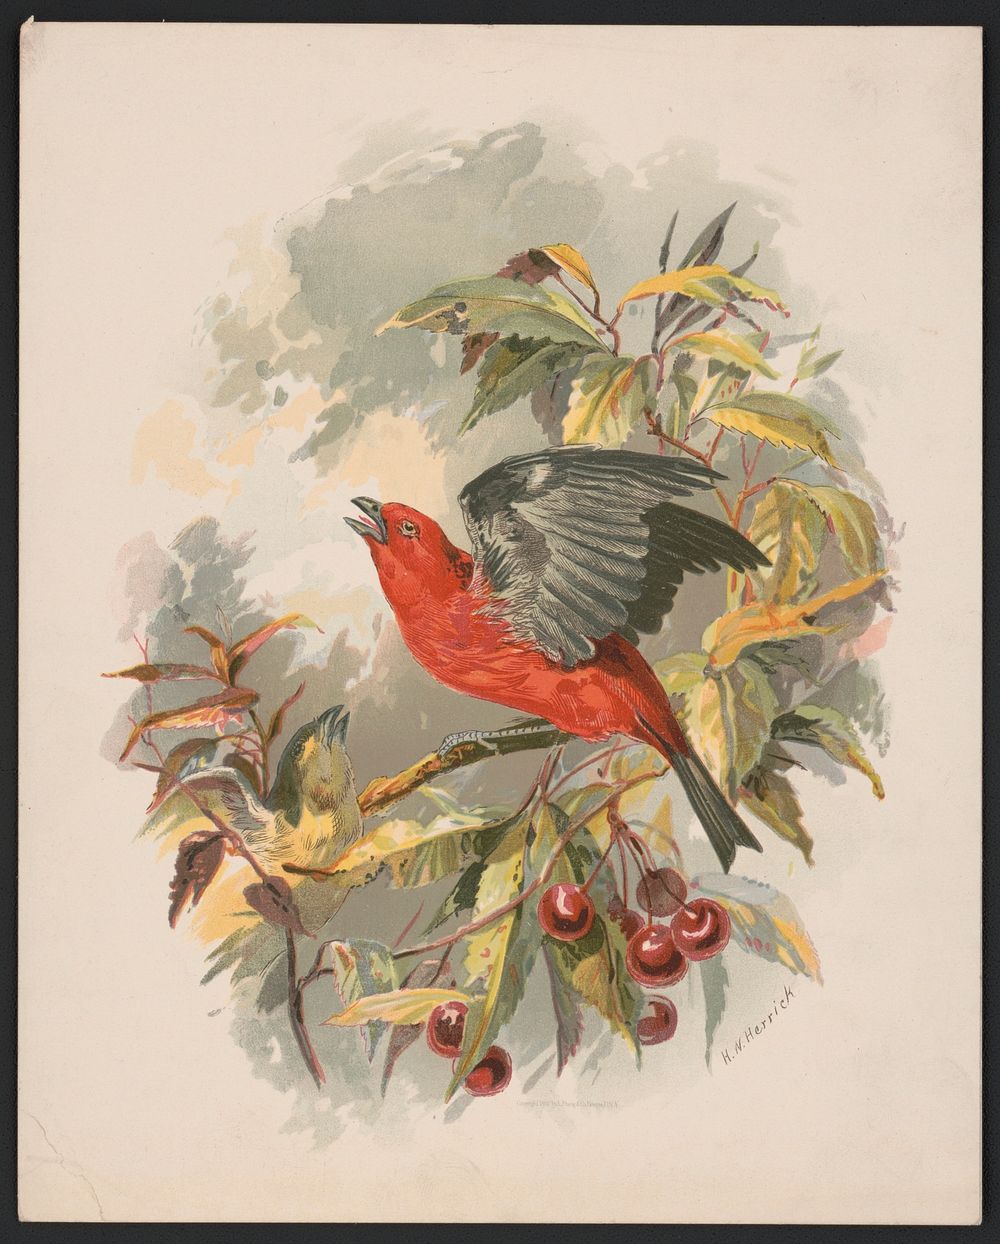 Scarlet tanager on a cherry tree branch (1892) by Herrick, Henry Walker